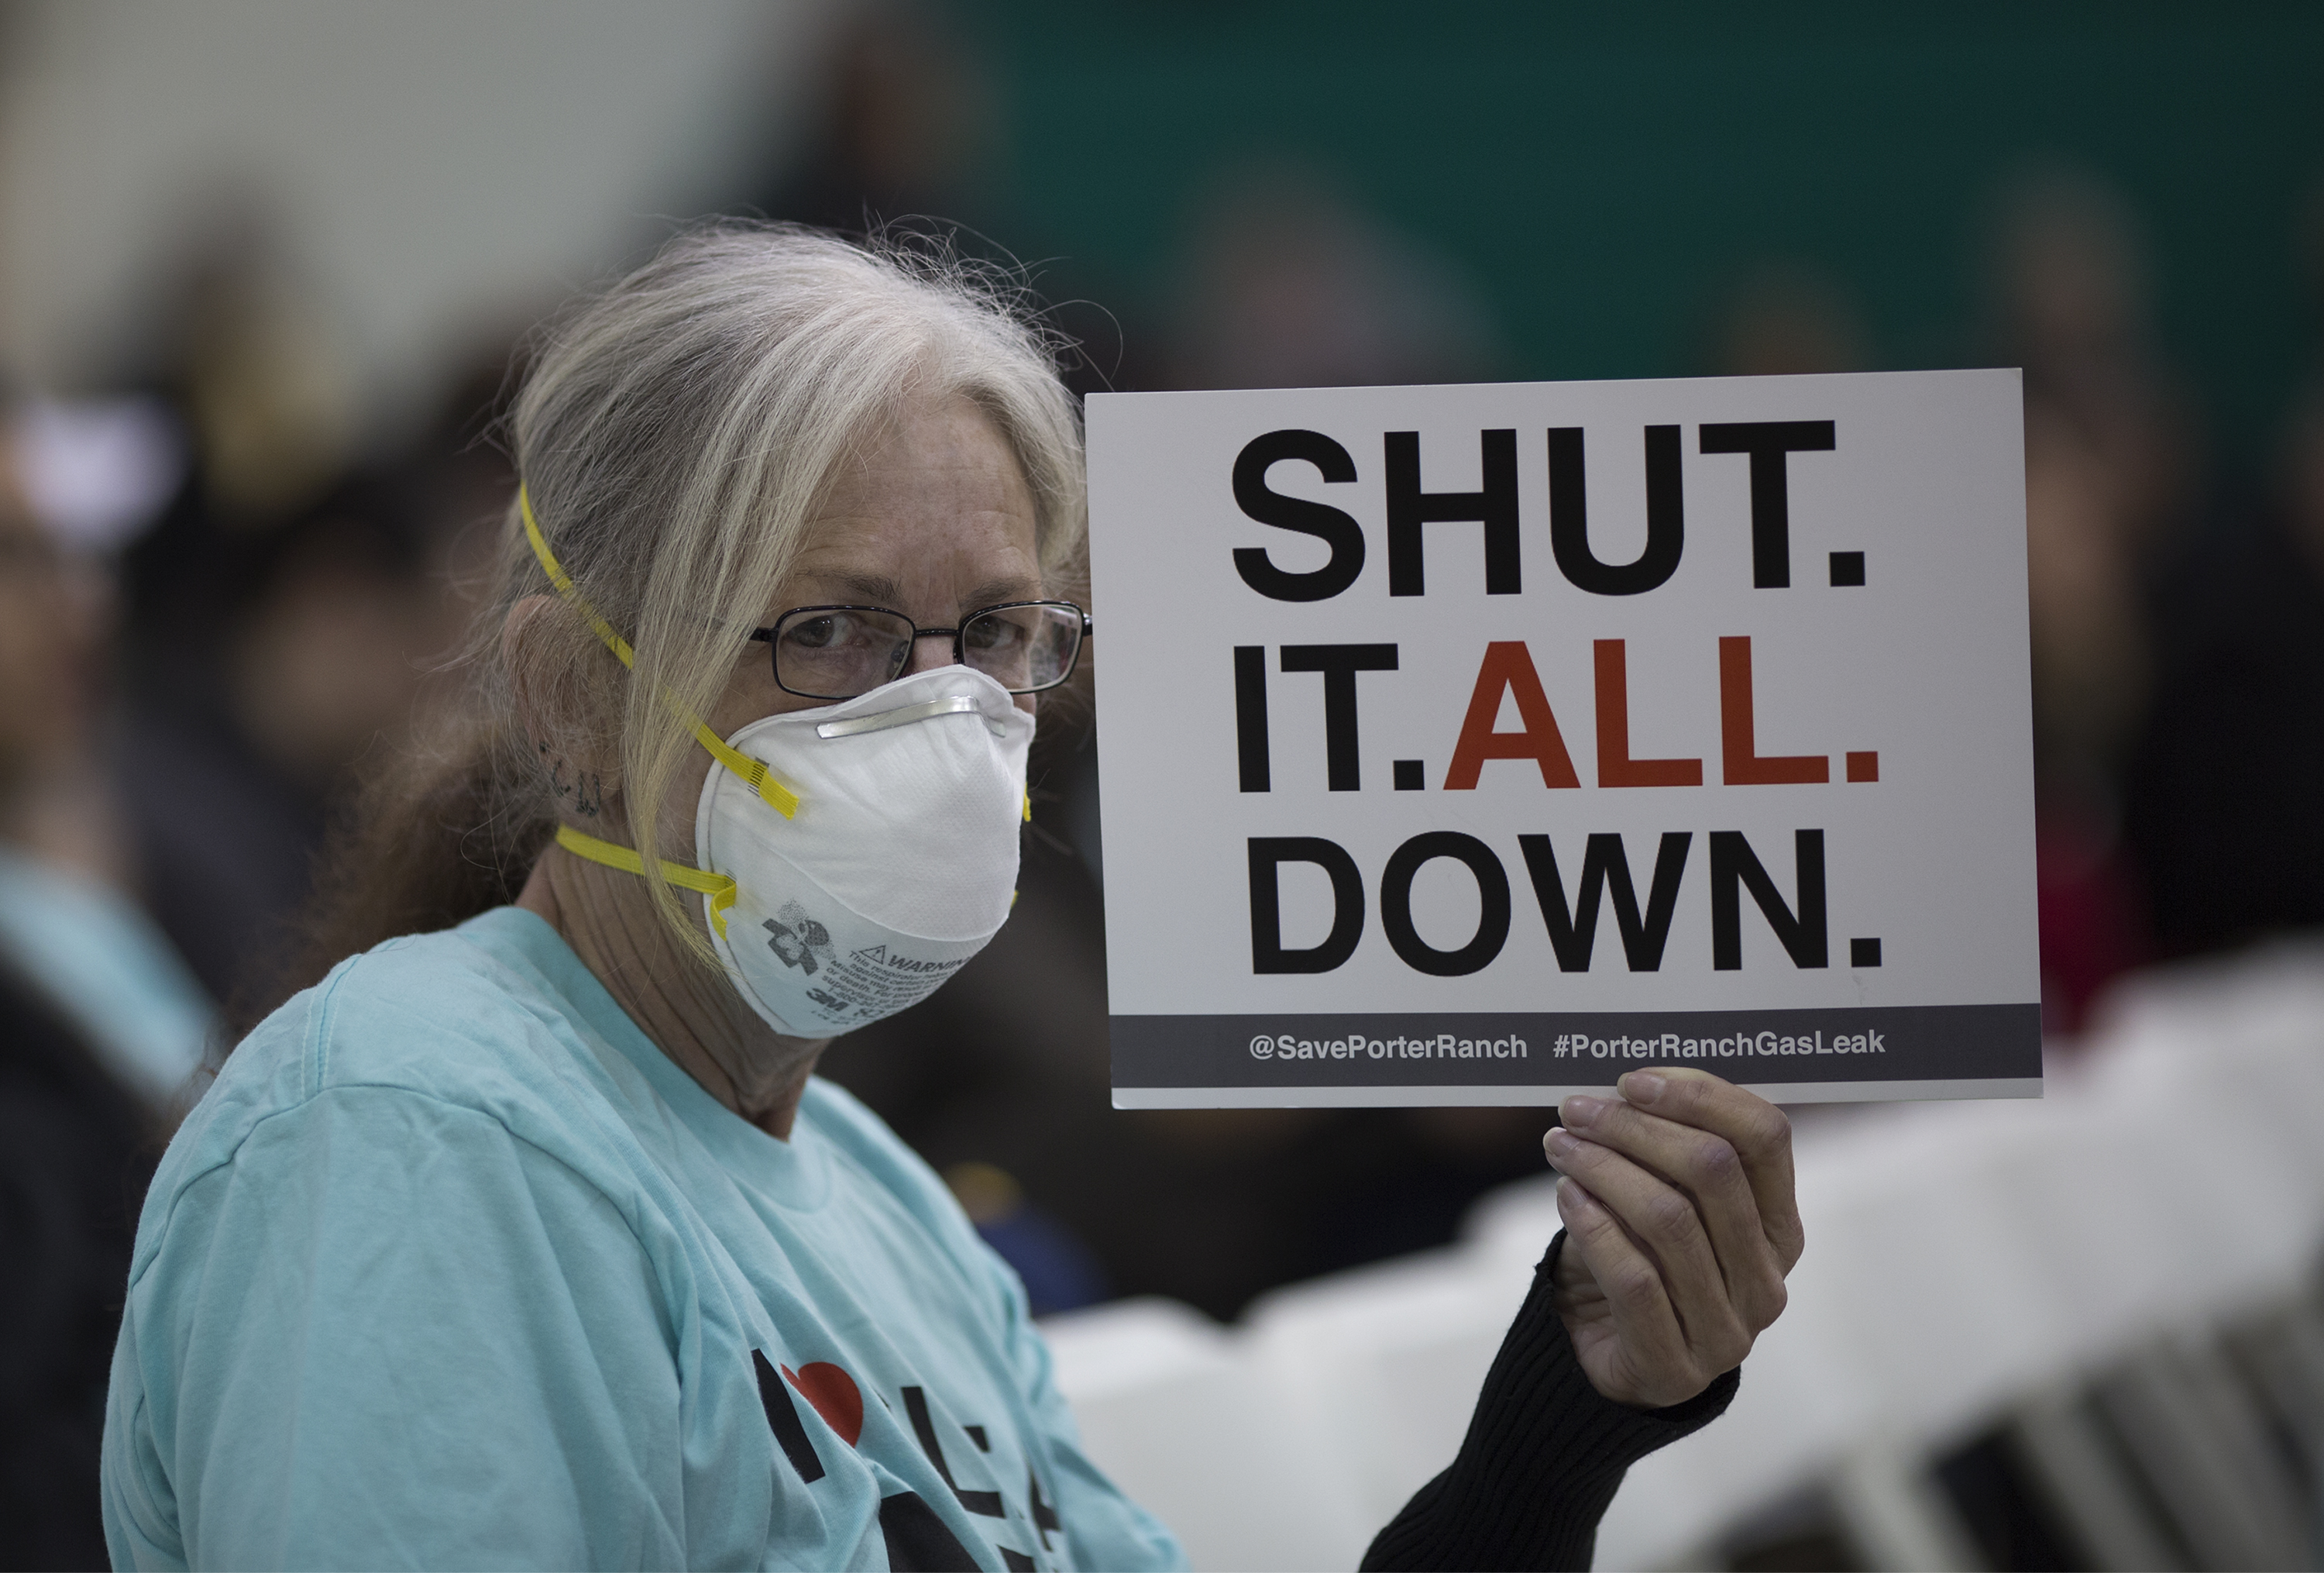 Community Hearing Held Over Ongoing Porter Ranch Gas Leak